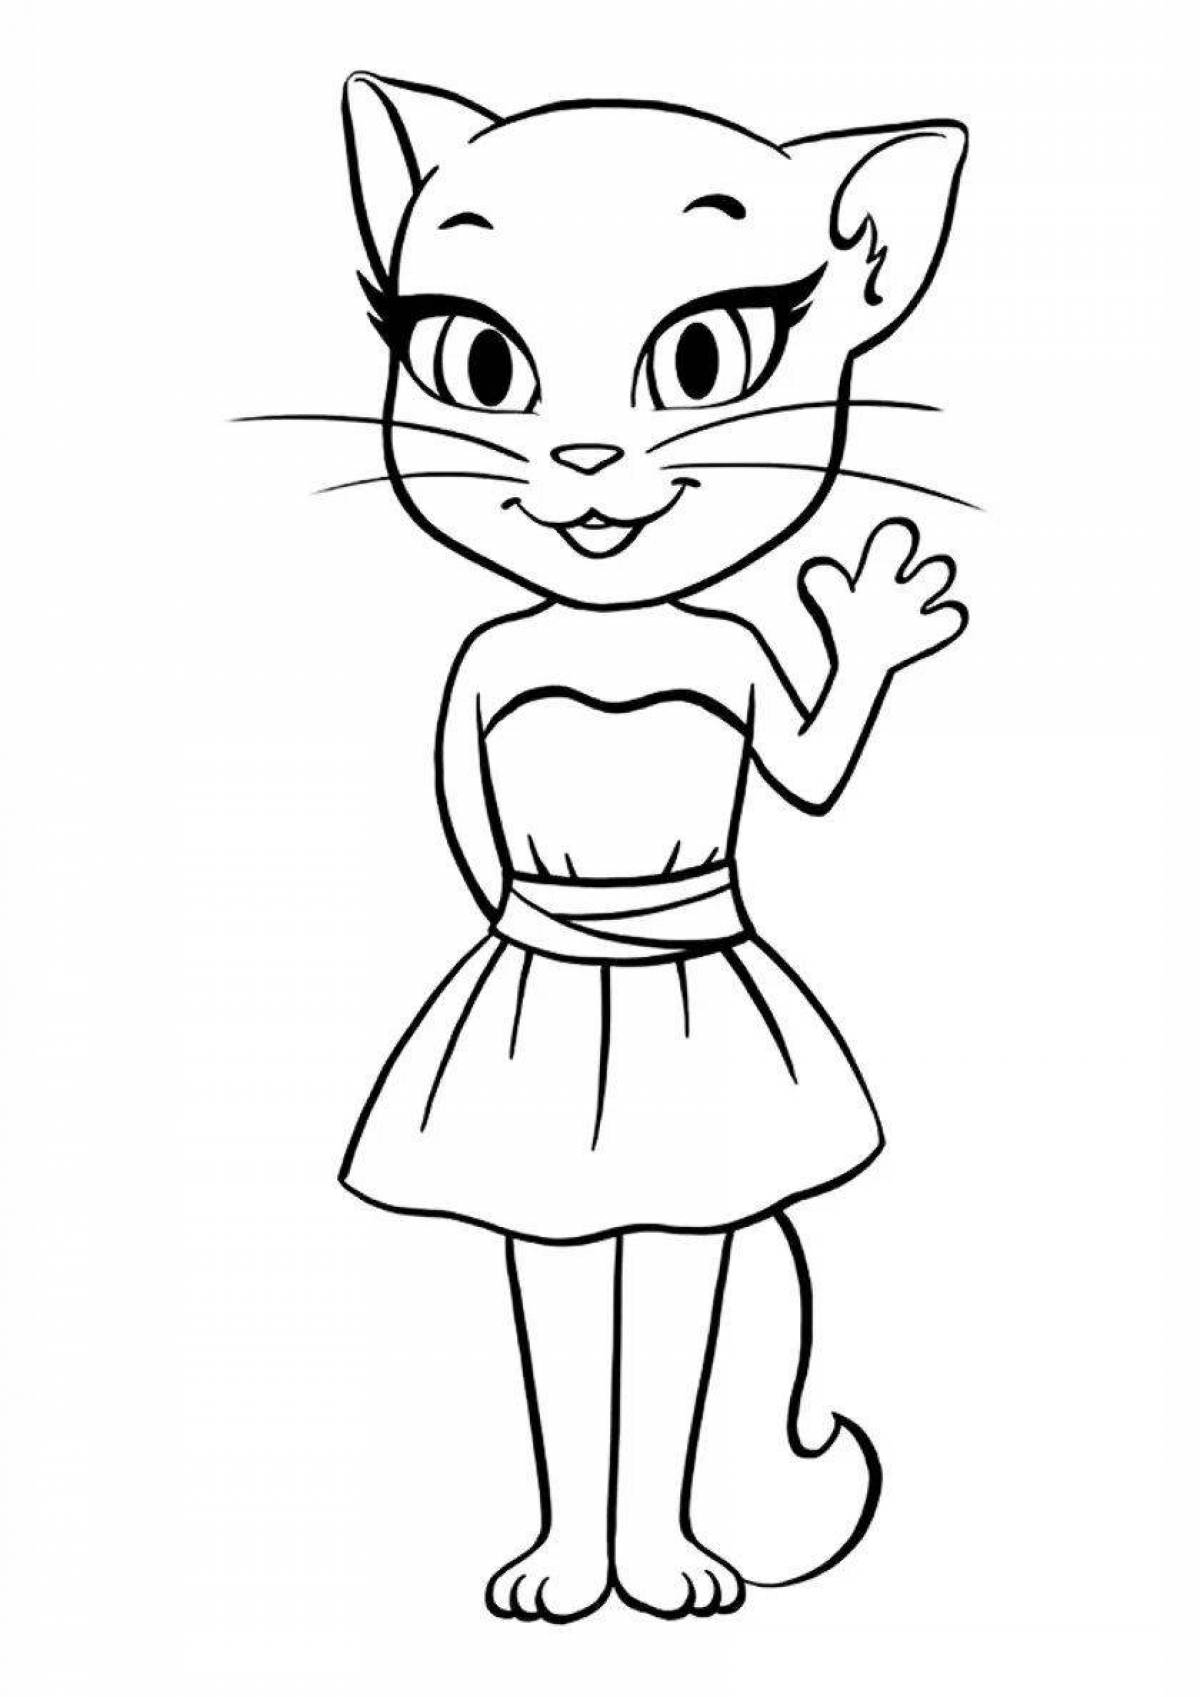 Angela cat coloring page animated